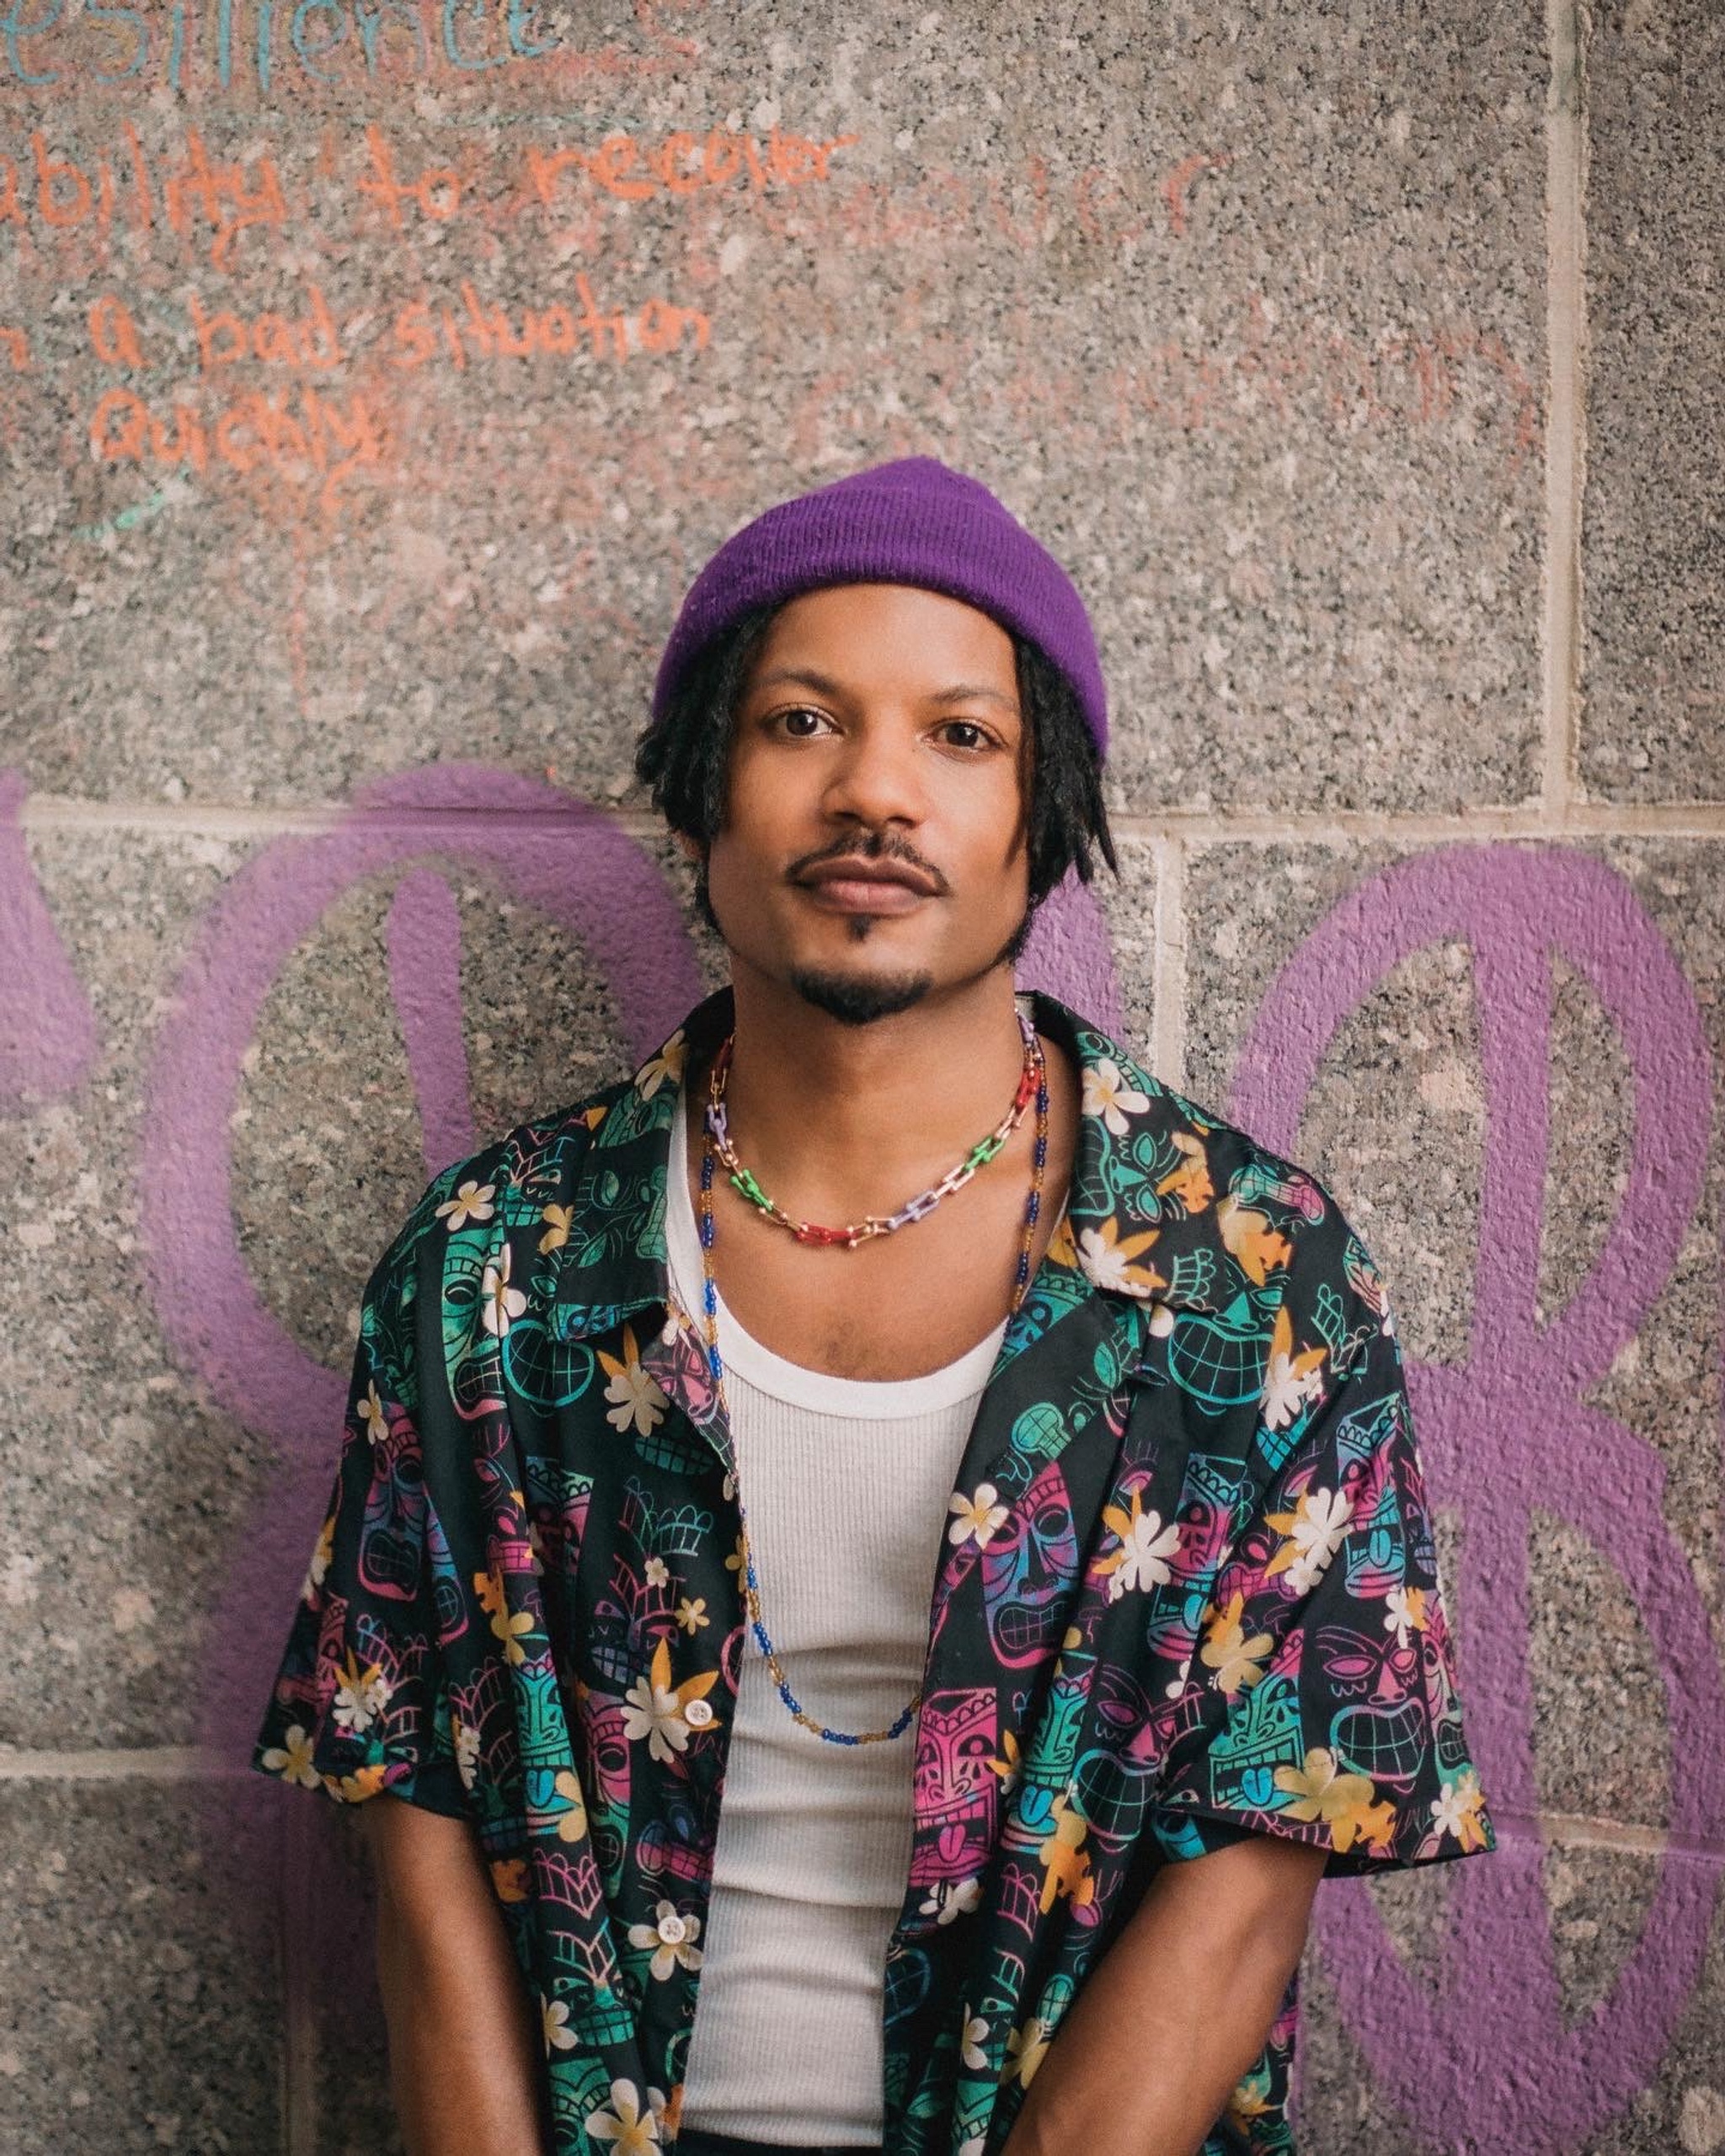 Artist Jaime Cepero looks directly at us in a portrait posed against a stone wall. An Afrolatino person, they wear a purple cap over short locs and a colorful floral print shirt. They have a contented look on their face. 